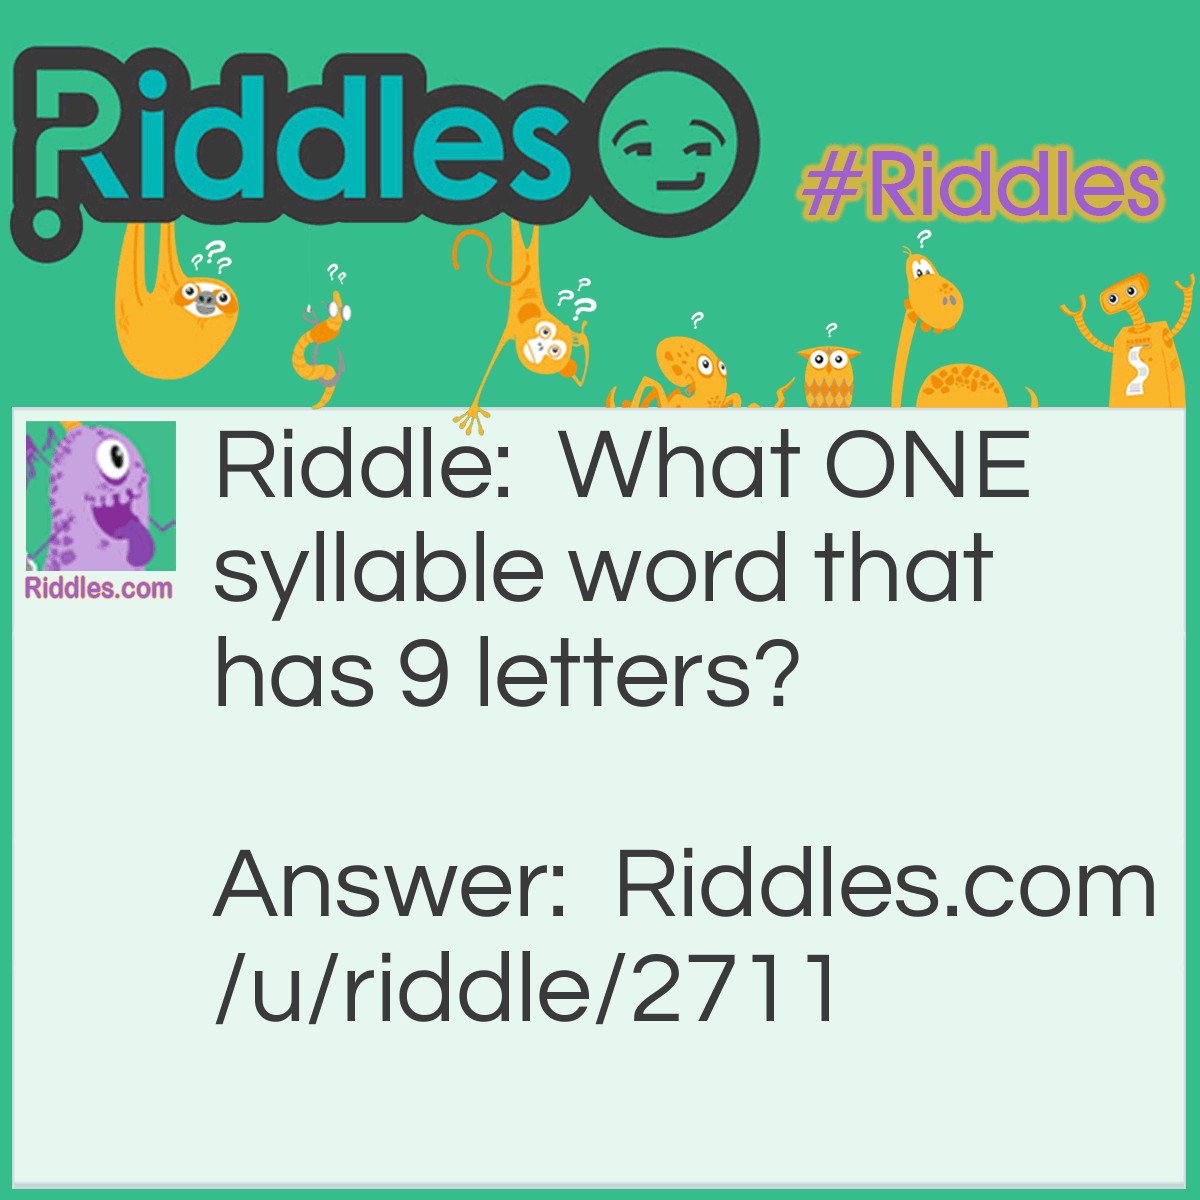 Riddle: What ONE syllable word that has 9 letters? Answer: - Stretched; or - Straights; or - Strengths; or - Squelched; - and many more....